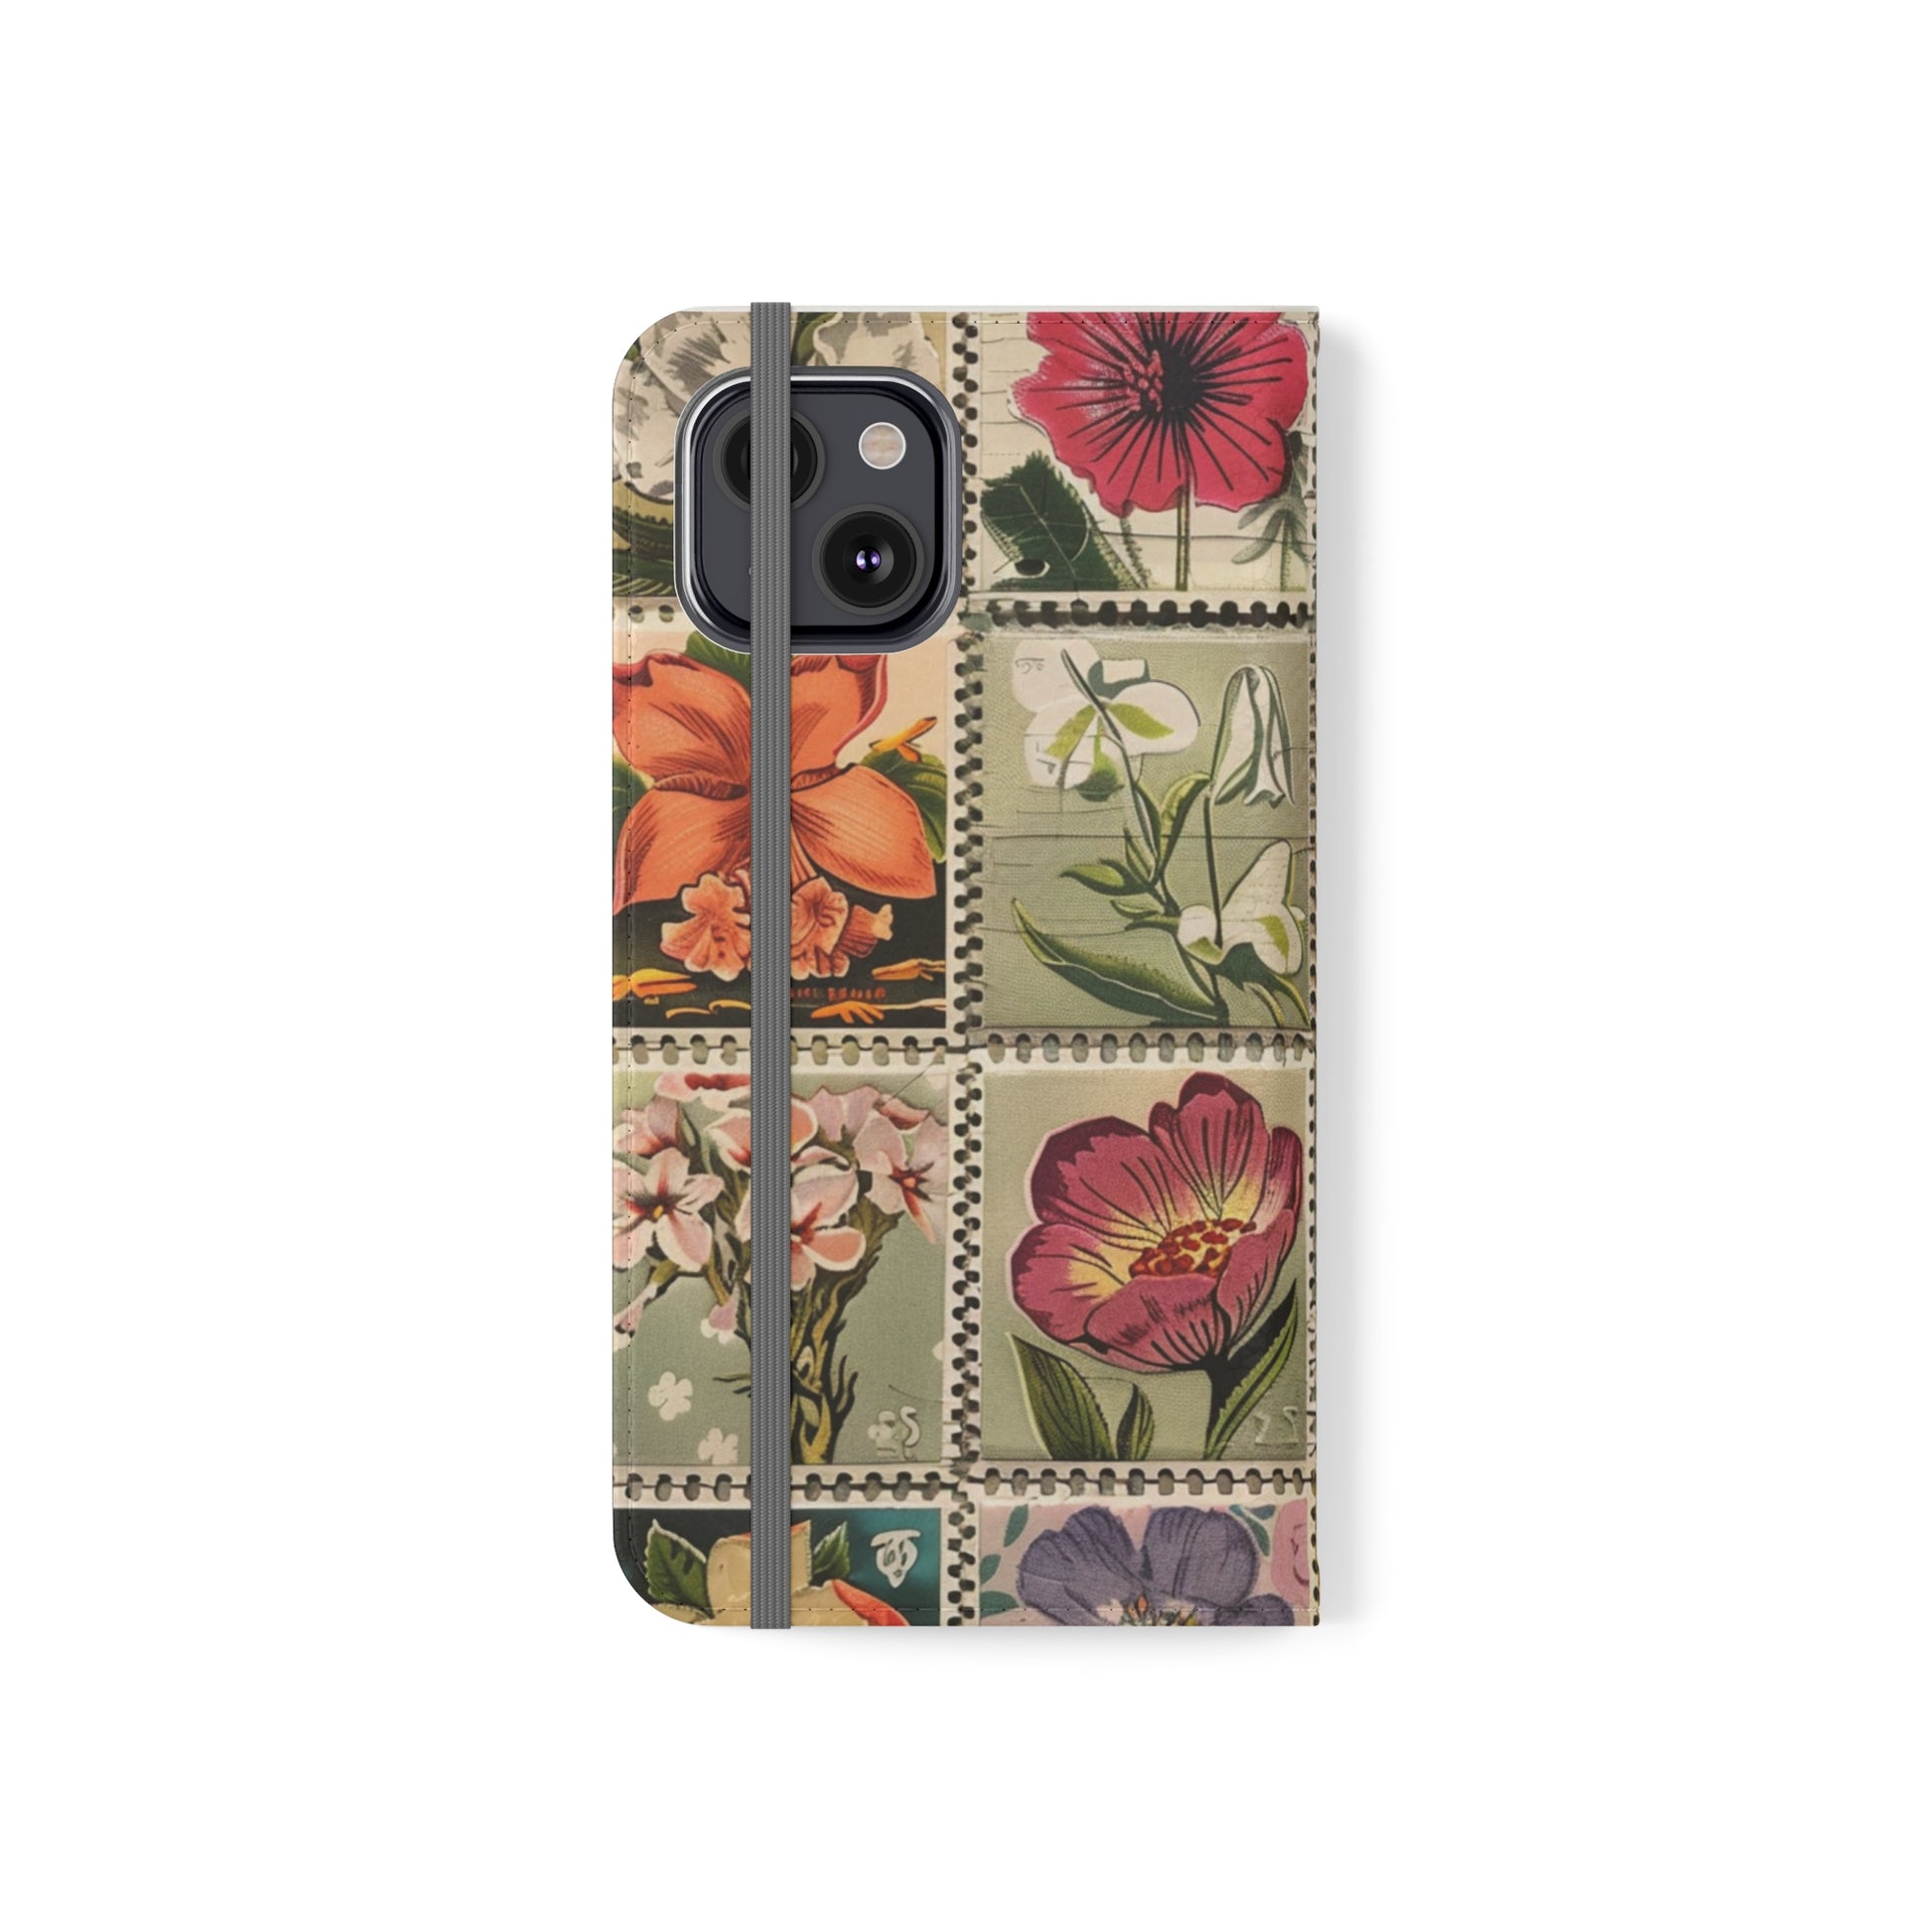 Artistic floral stamp case for iPhone 11 Pro Max